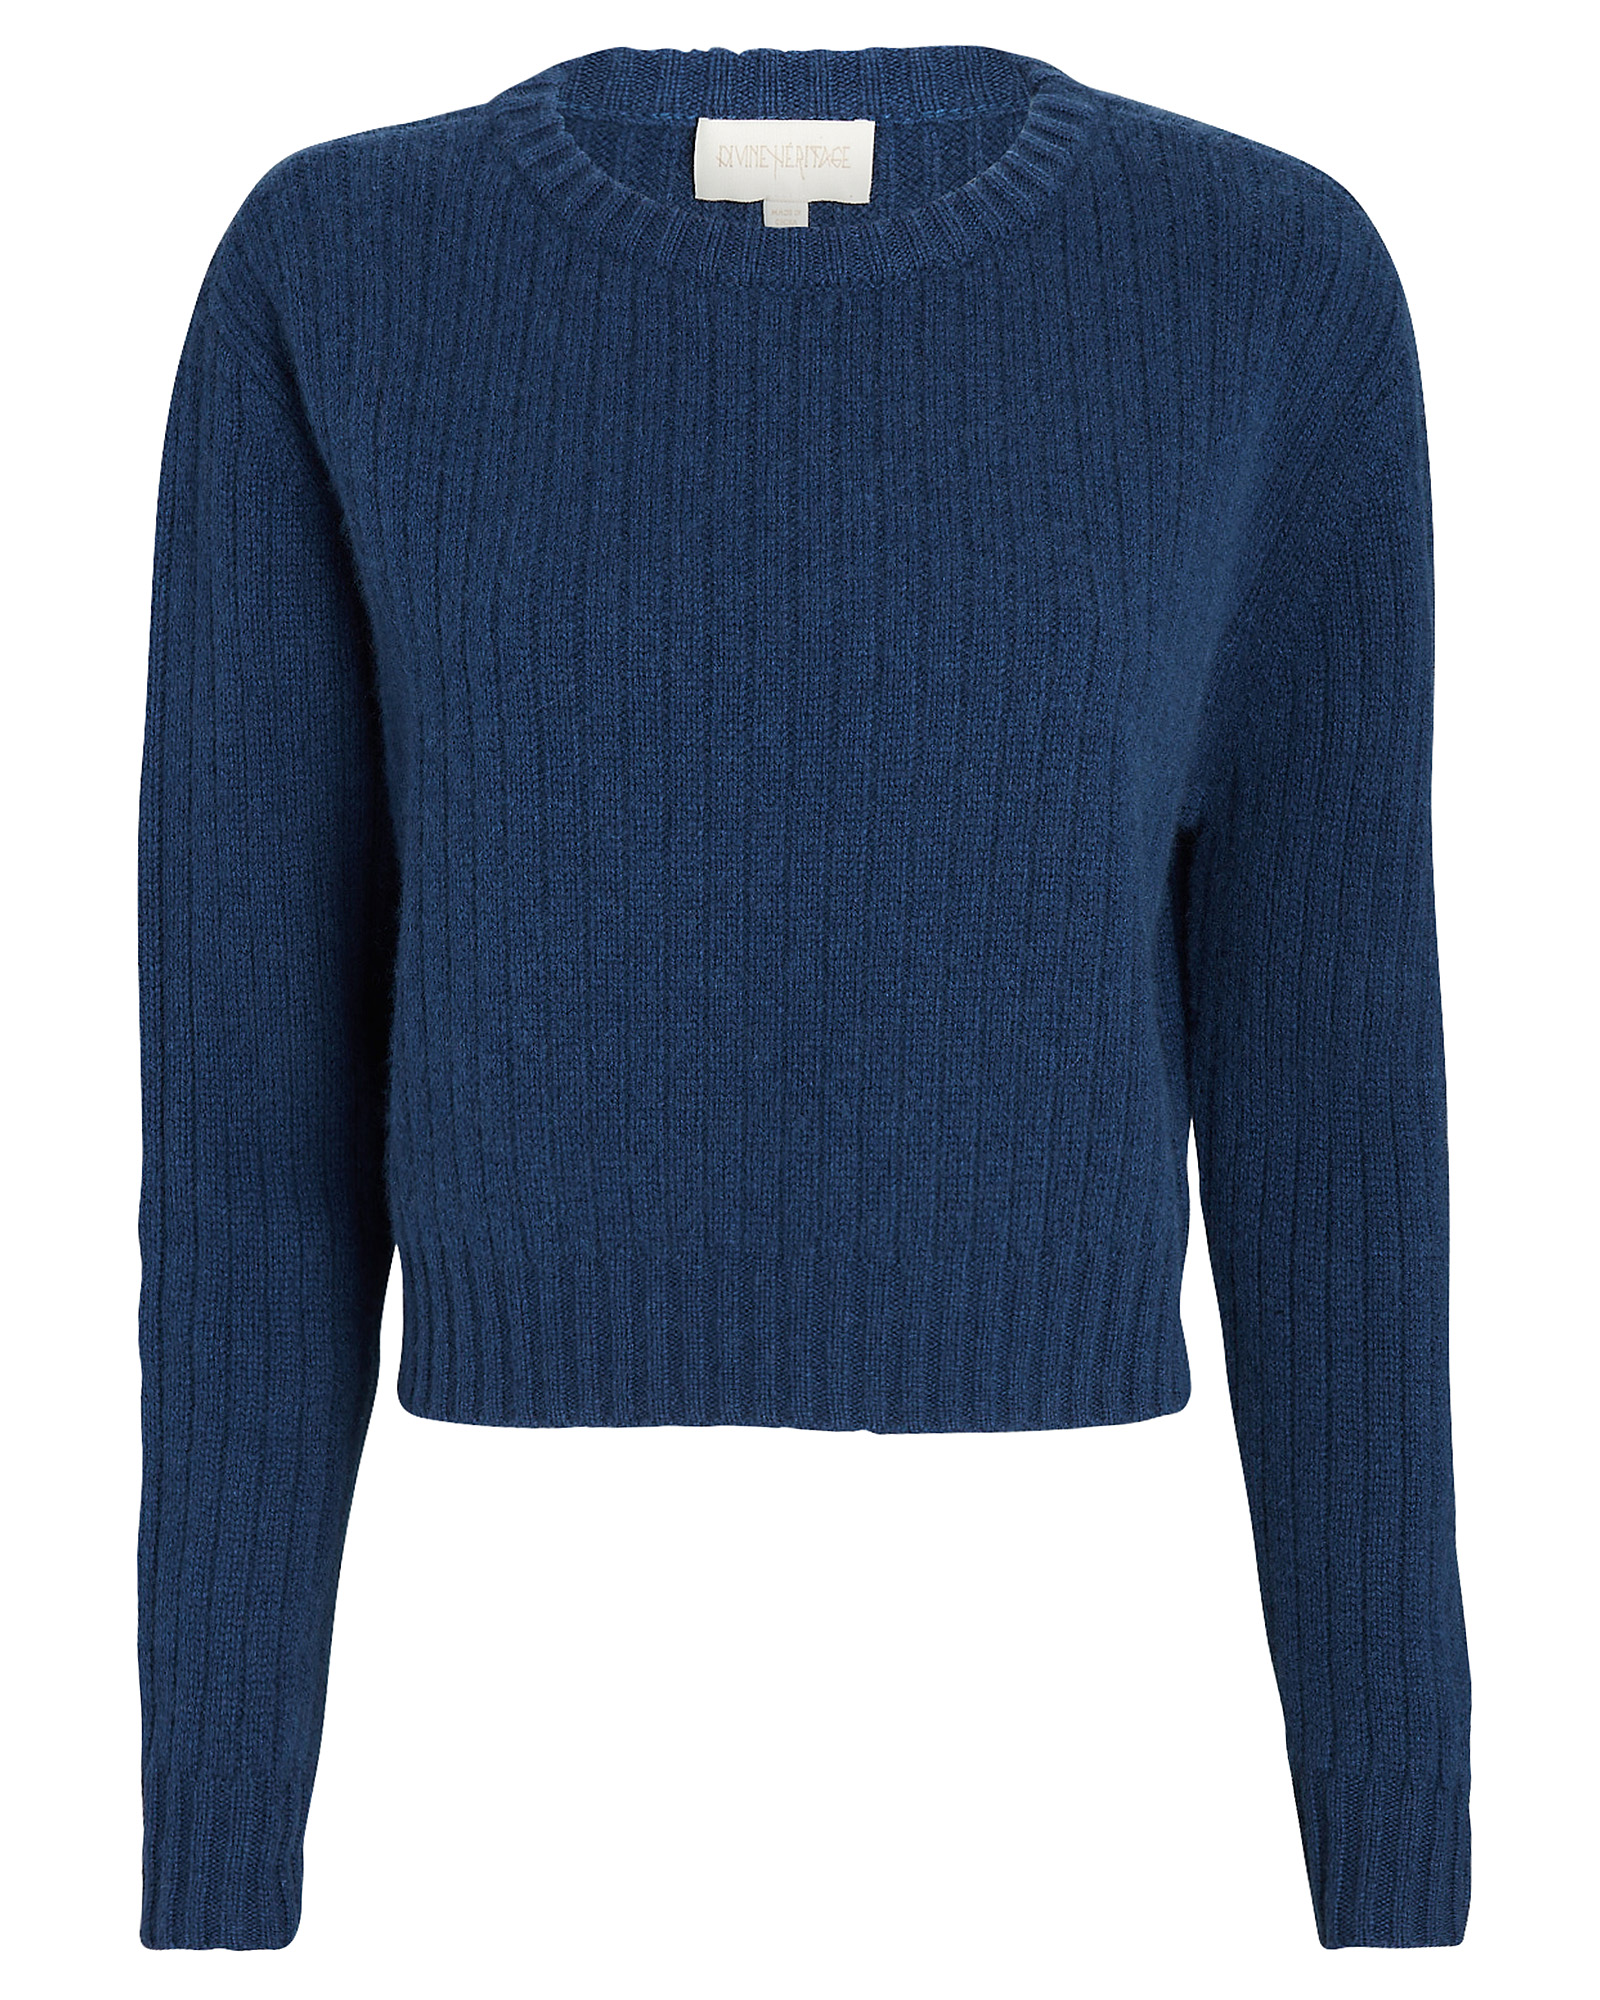 Divine Heritage Recycled Wool-Cashmere Sweater | INTERMIX®